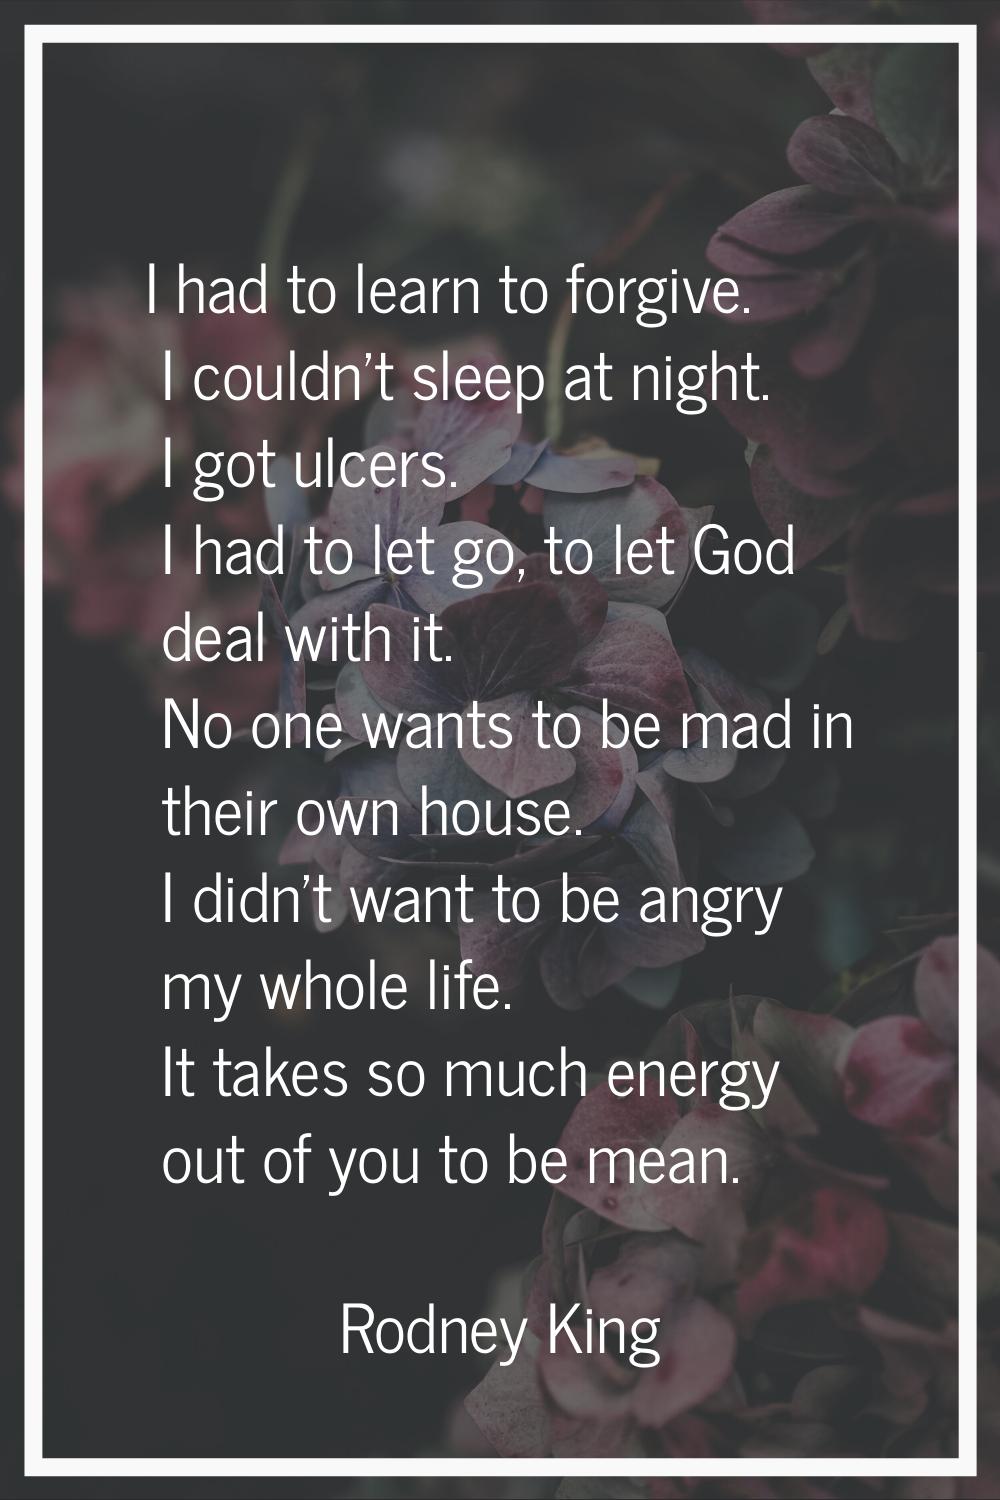 I had to learn to forgive. I couldn't sleep at night. I got ulcers. I had to let go, to let God dea